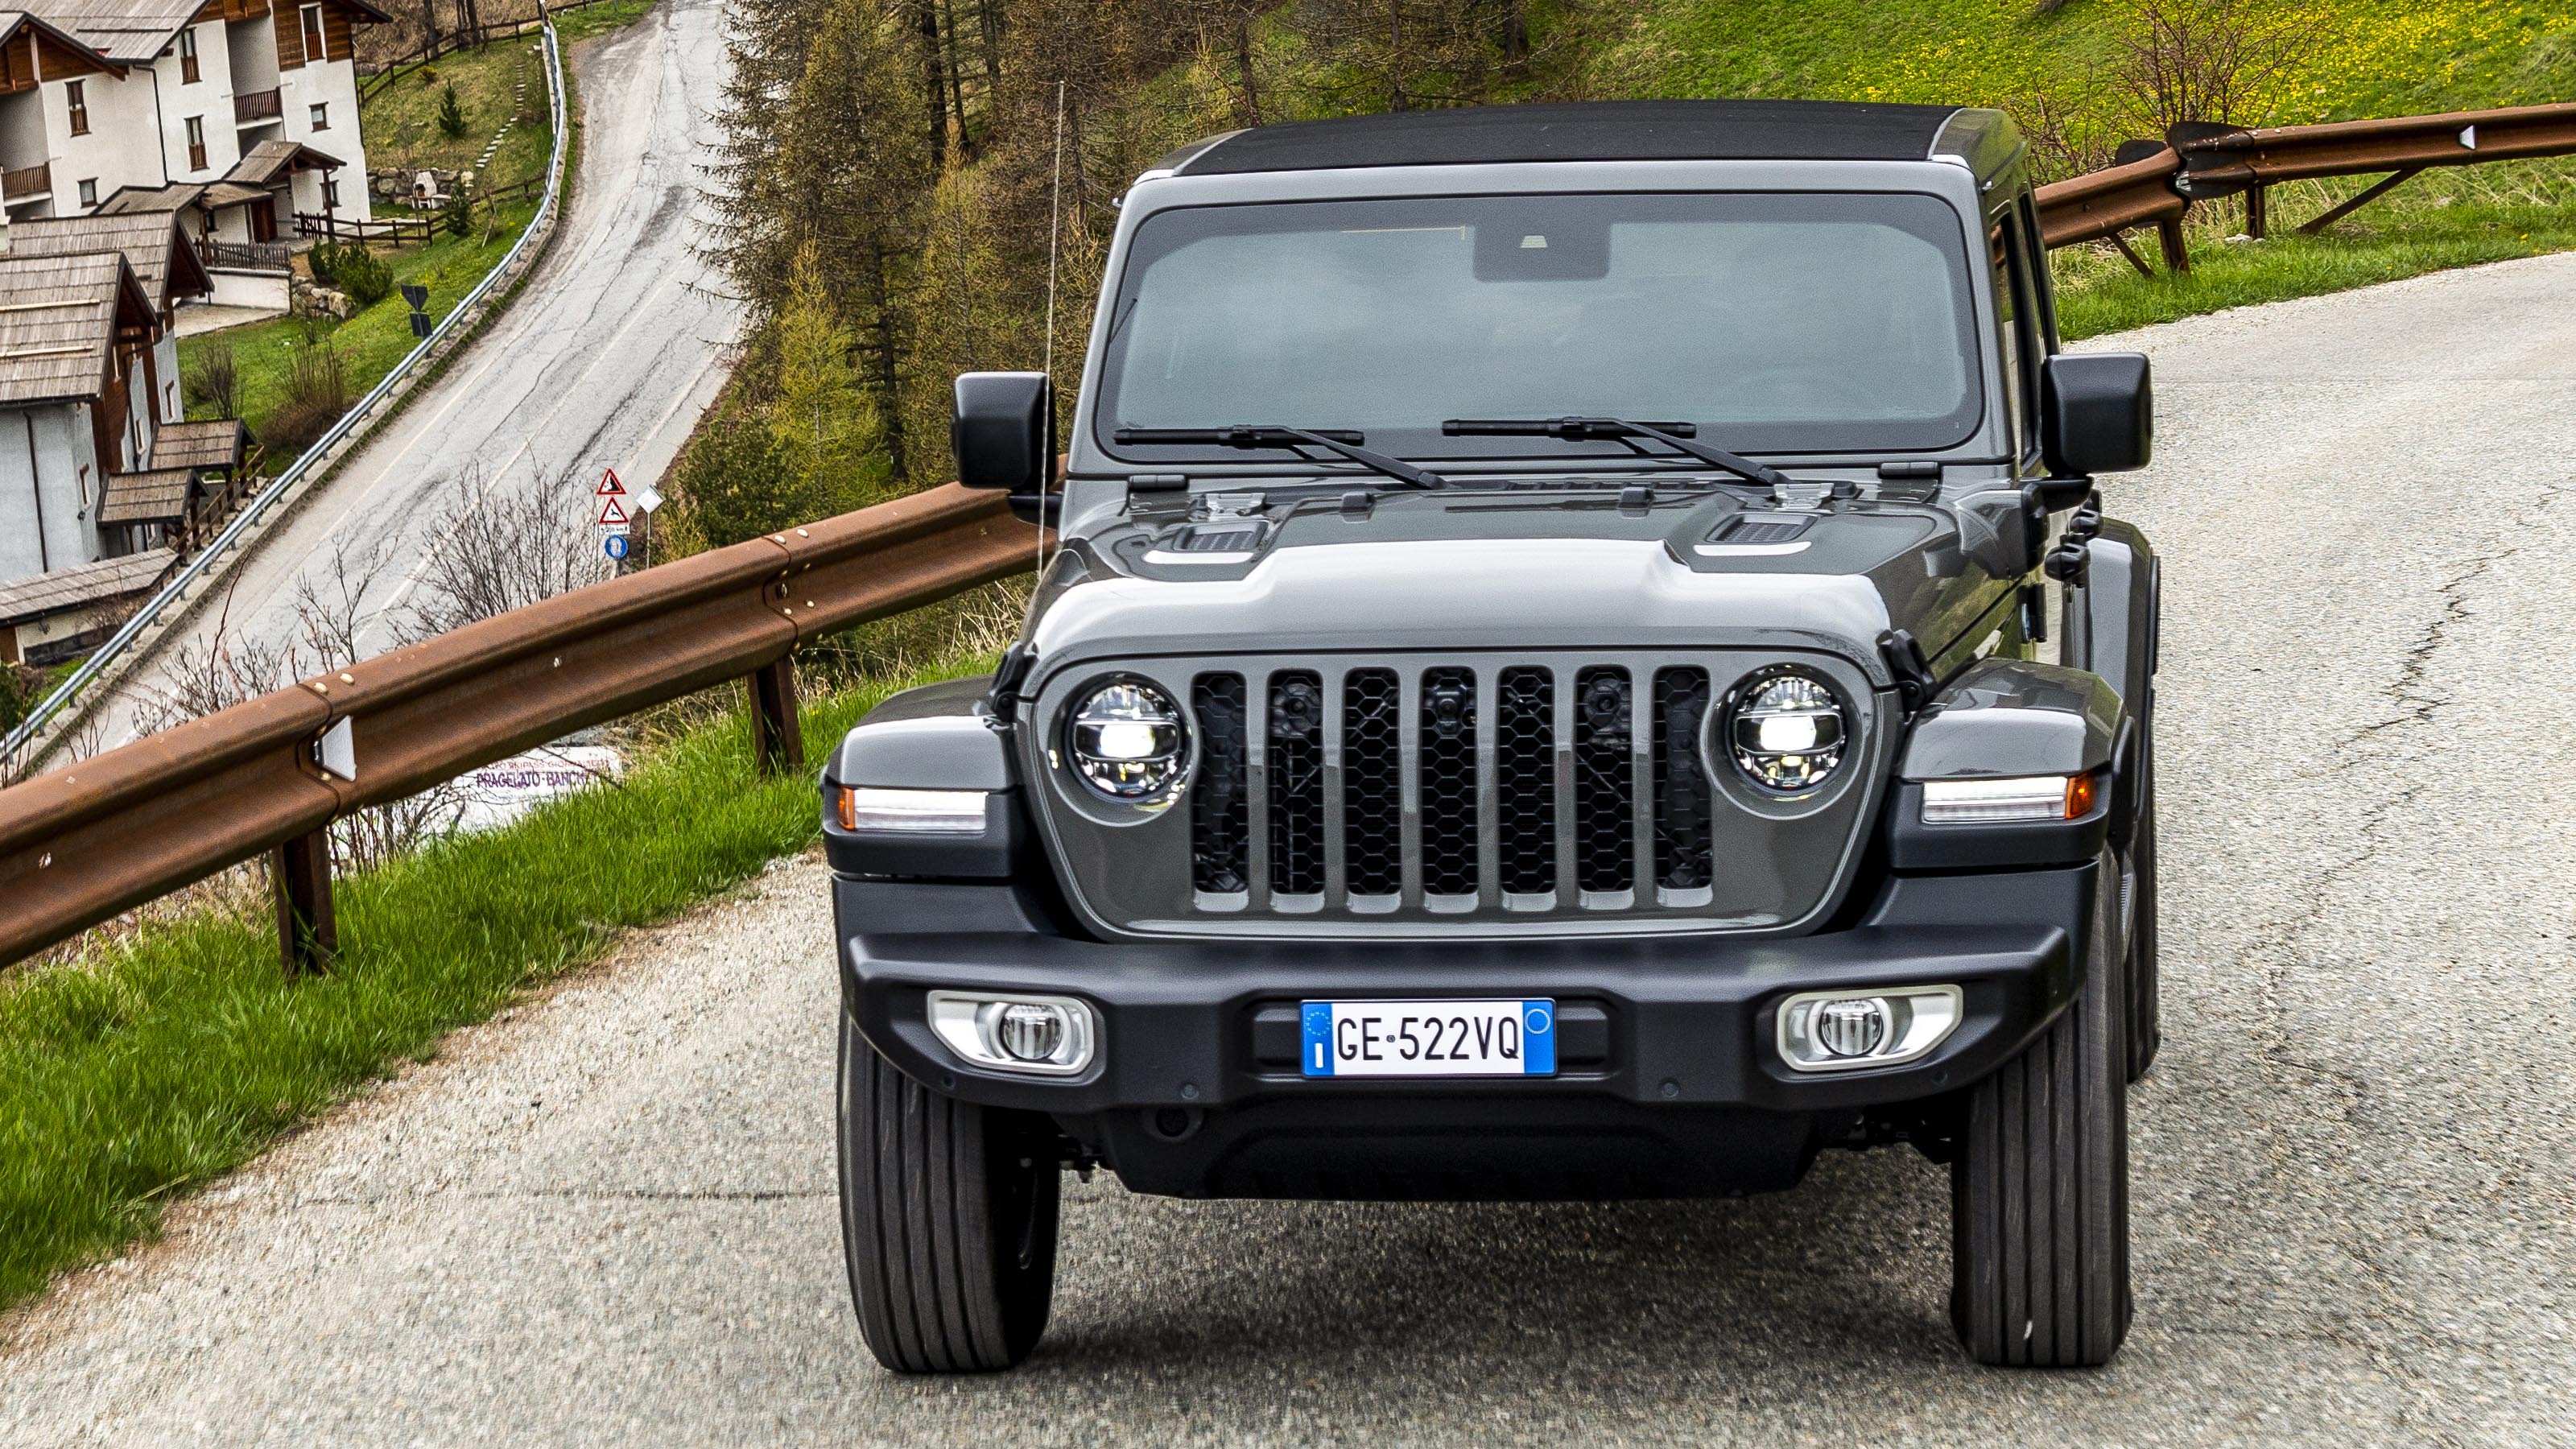 Jeep Wrangler 4xe plug-in hybrid: pictures, specs and details